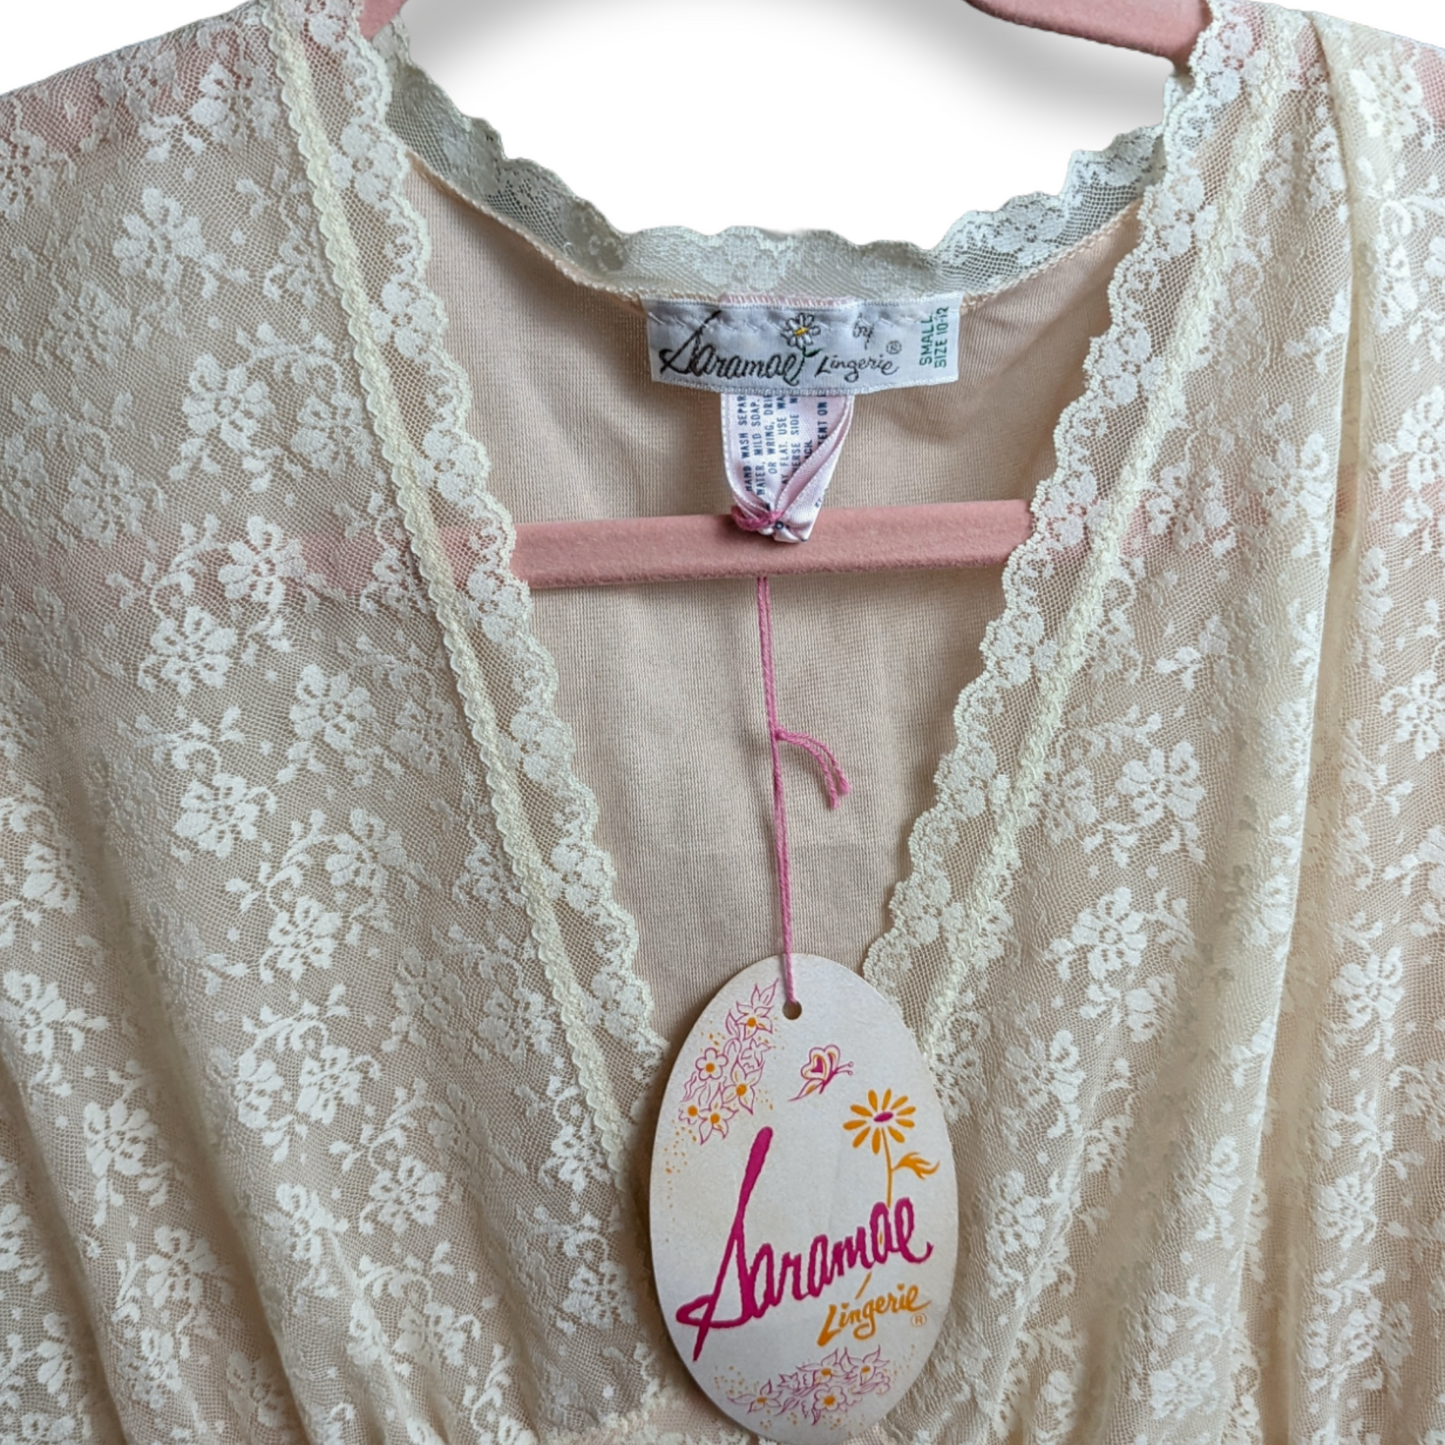 1970s Floor Length Soft Pink Saramae Lingerie Nightgown with Long Sleeves, Lace Cuffs, and Original Tags | Deadstock